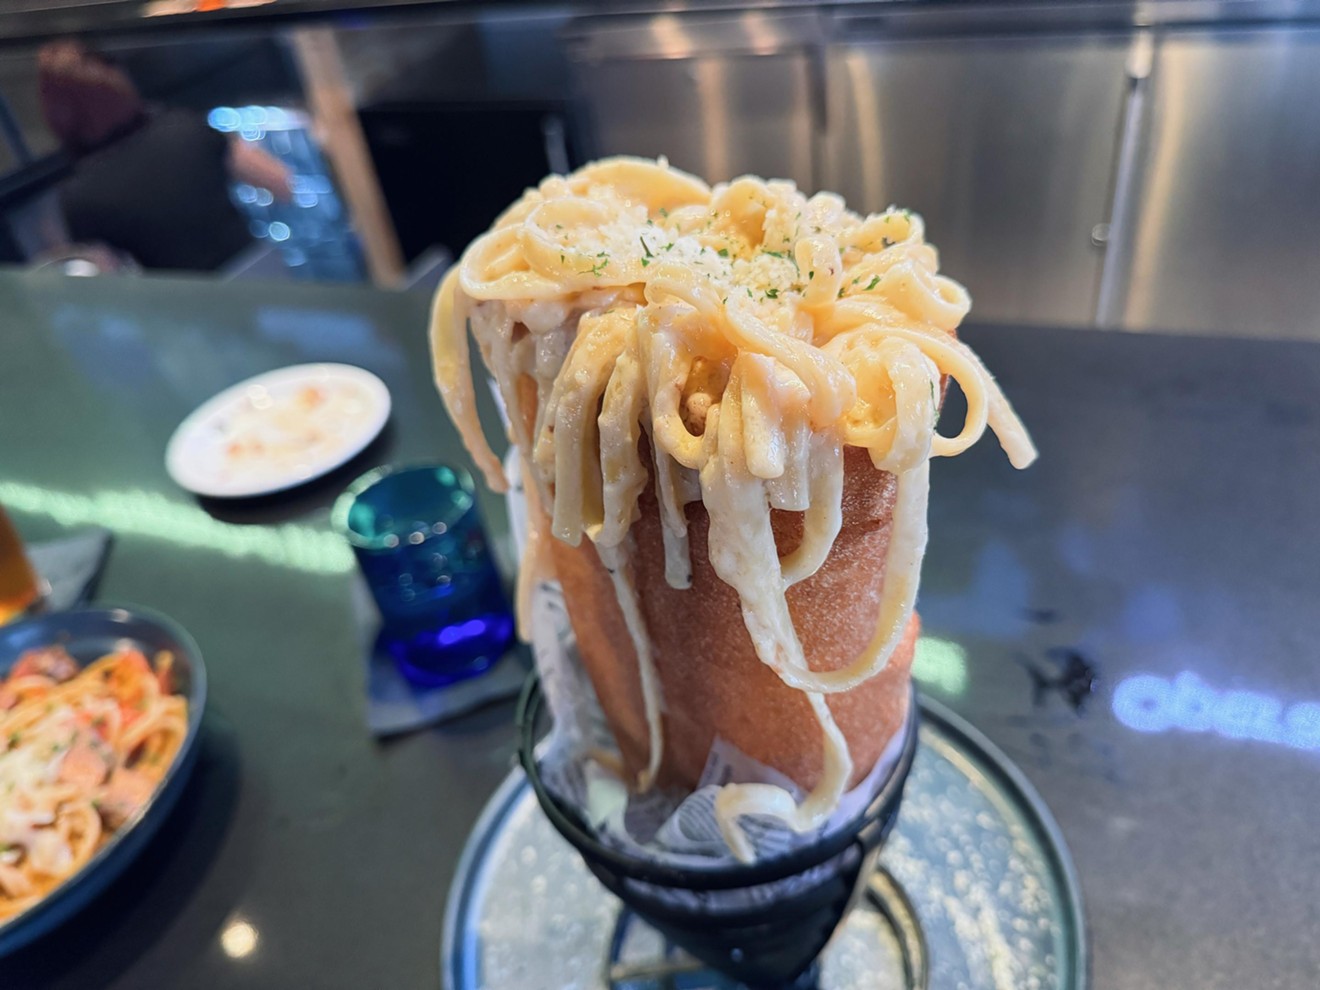 Don't be intimidated by the overflow of noodles from the Pasta Zeppelin. They can be neatly packed in, and it's a perfect handheld food.